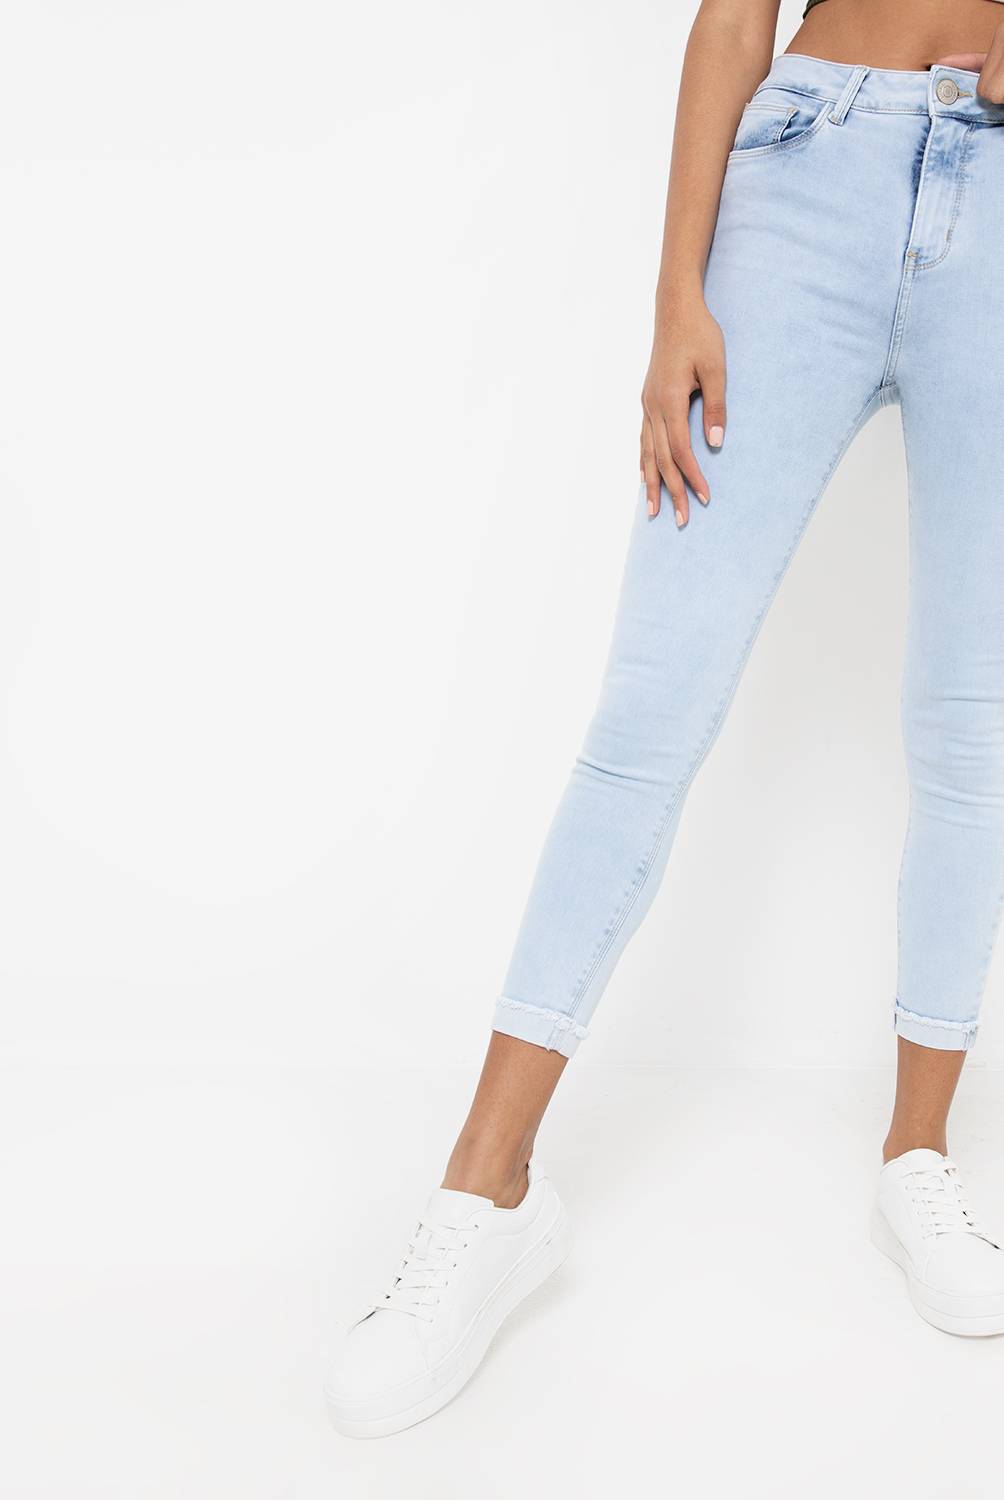 AEROPOSTALE - Jean Roll Up Mujer